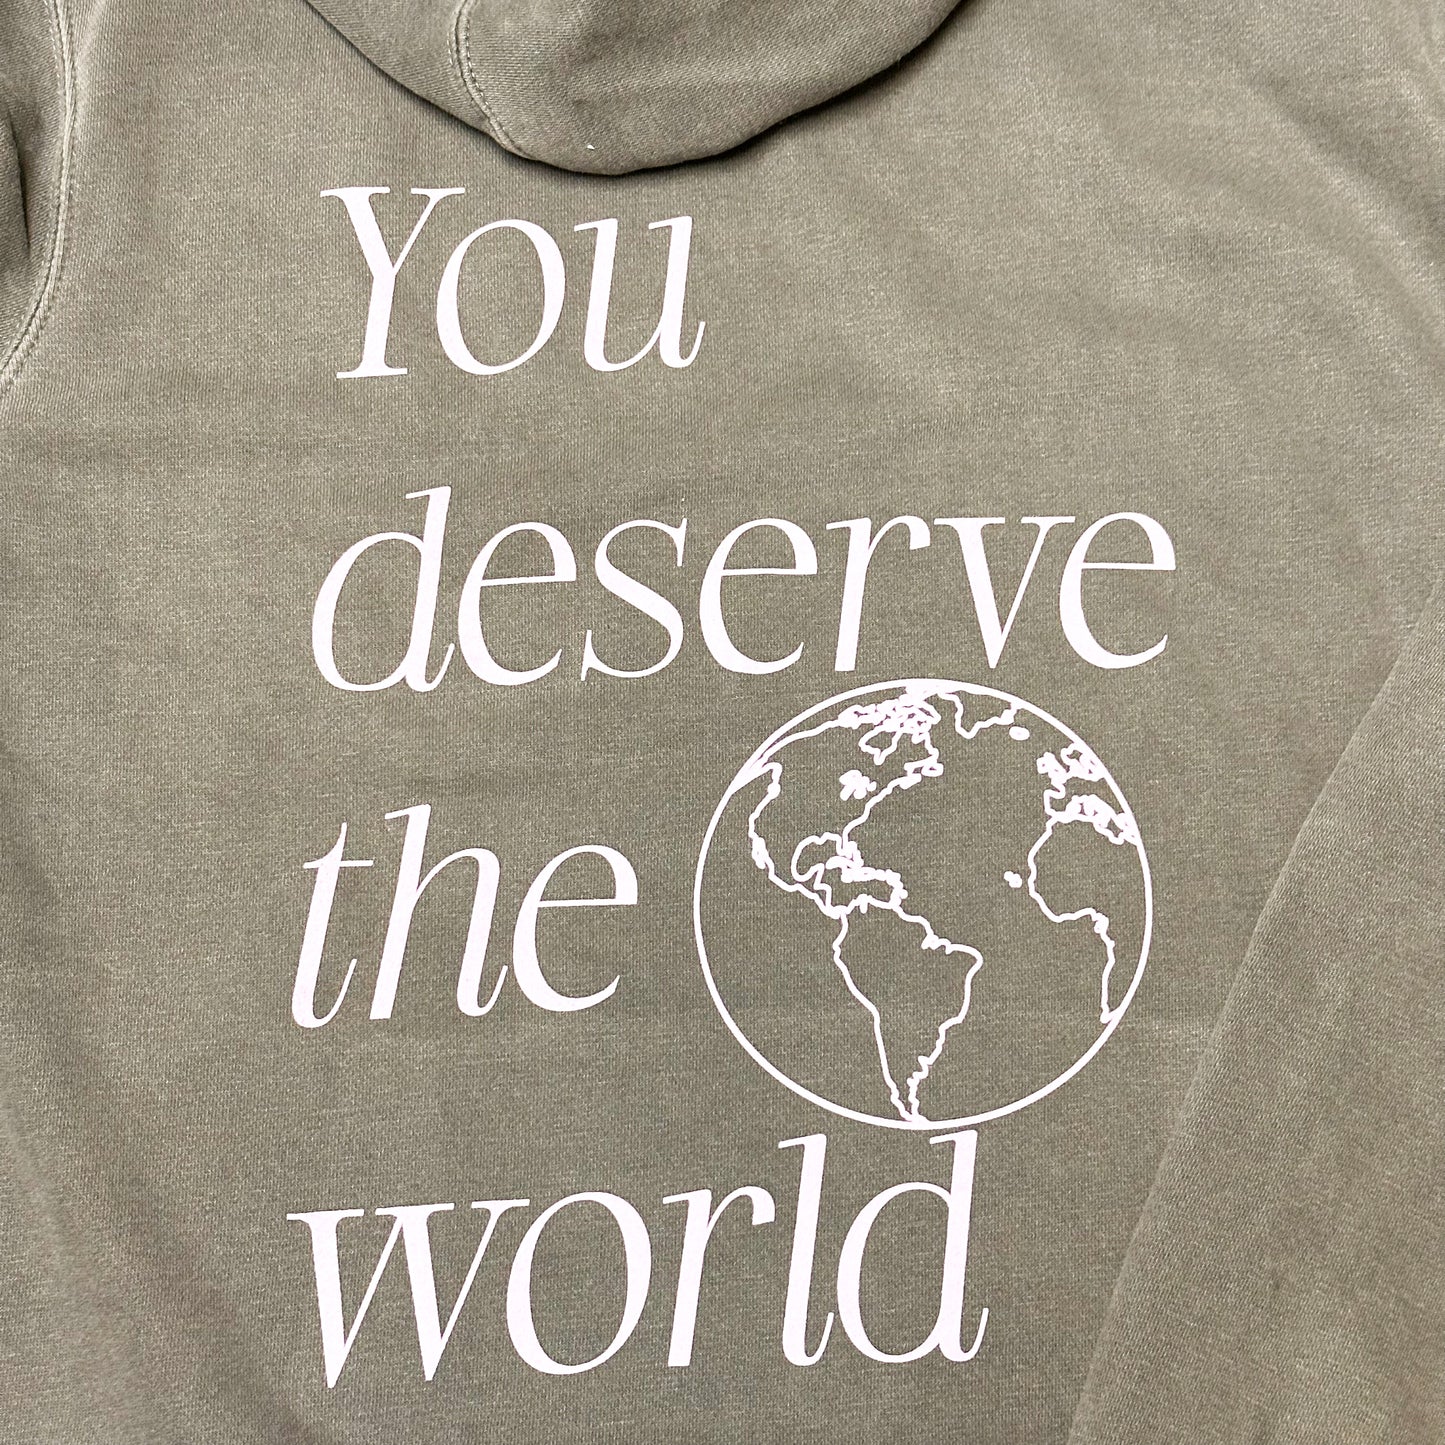 You deserve the world hoodie - Pepper